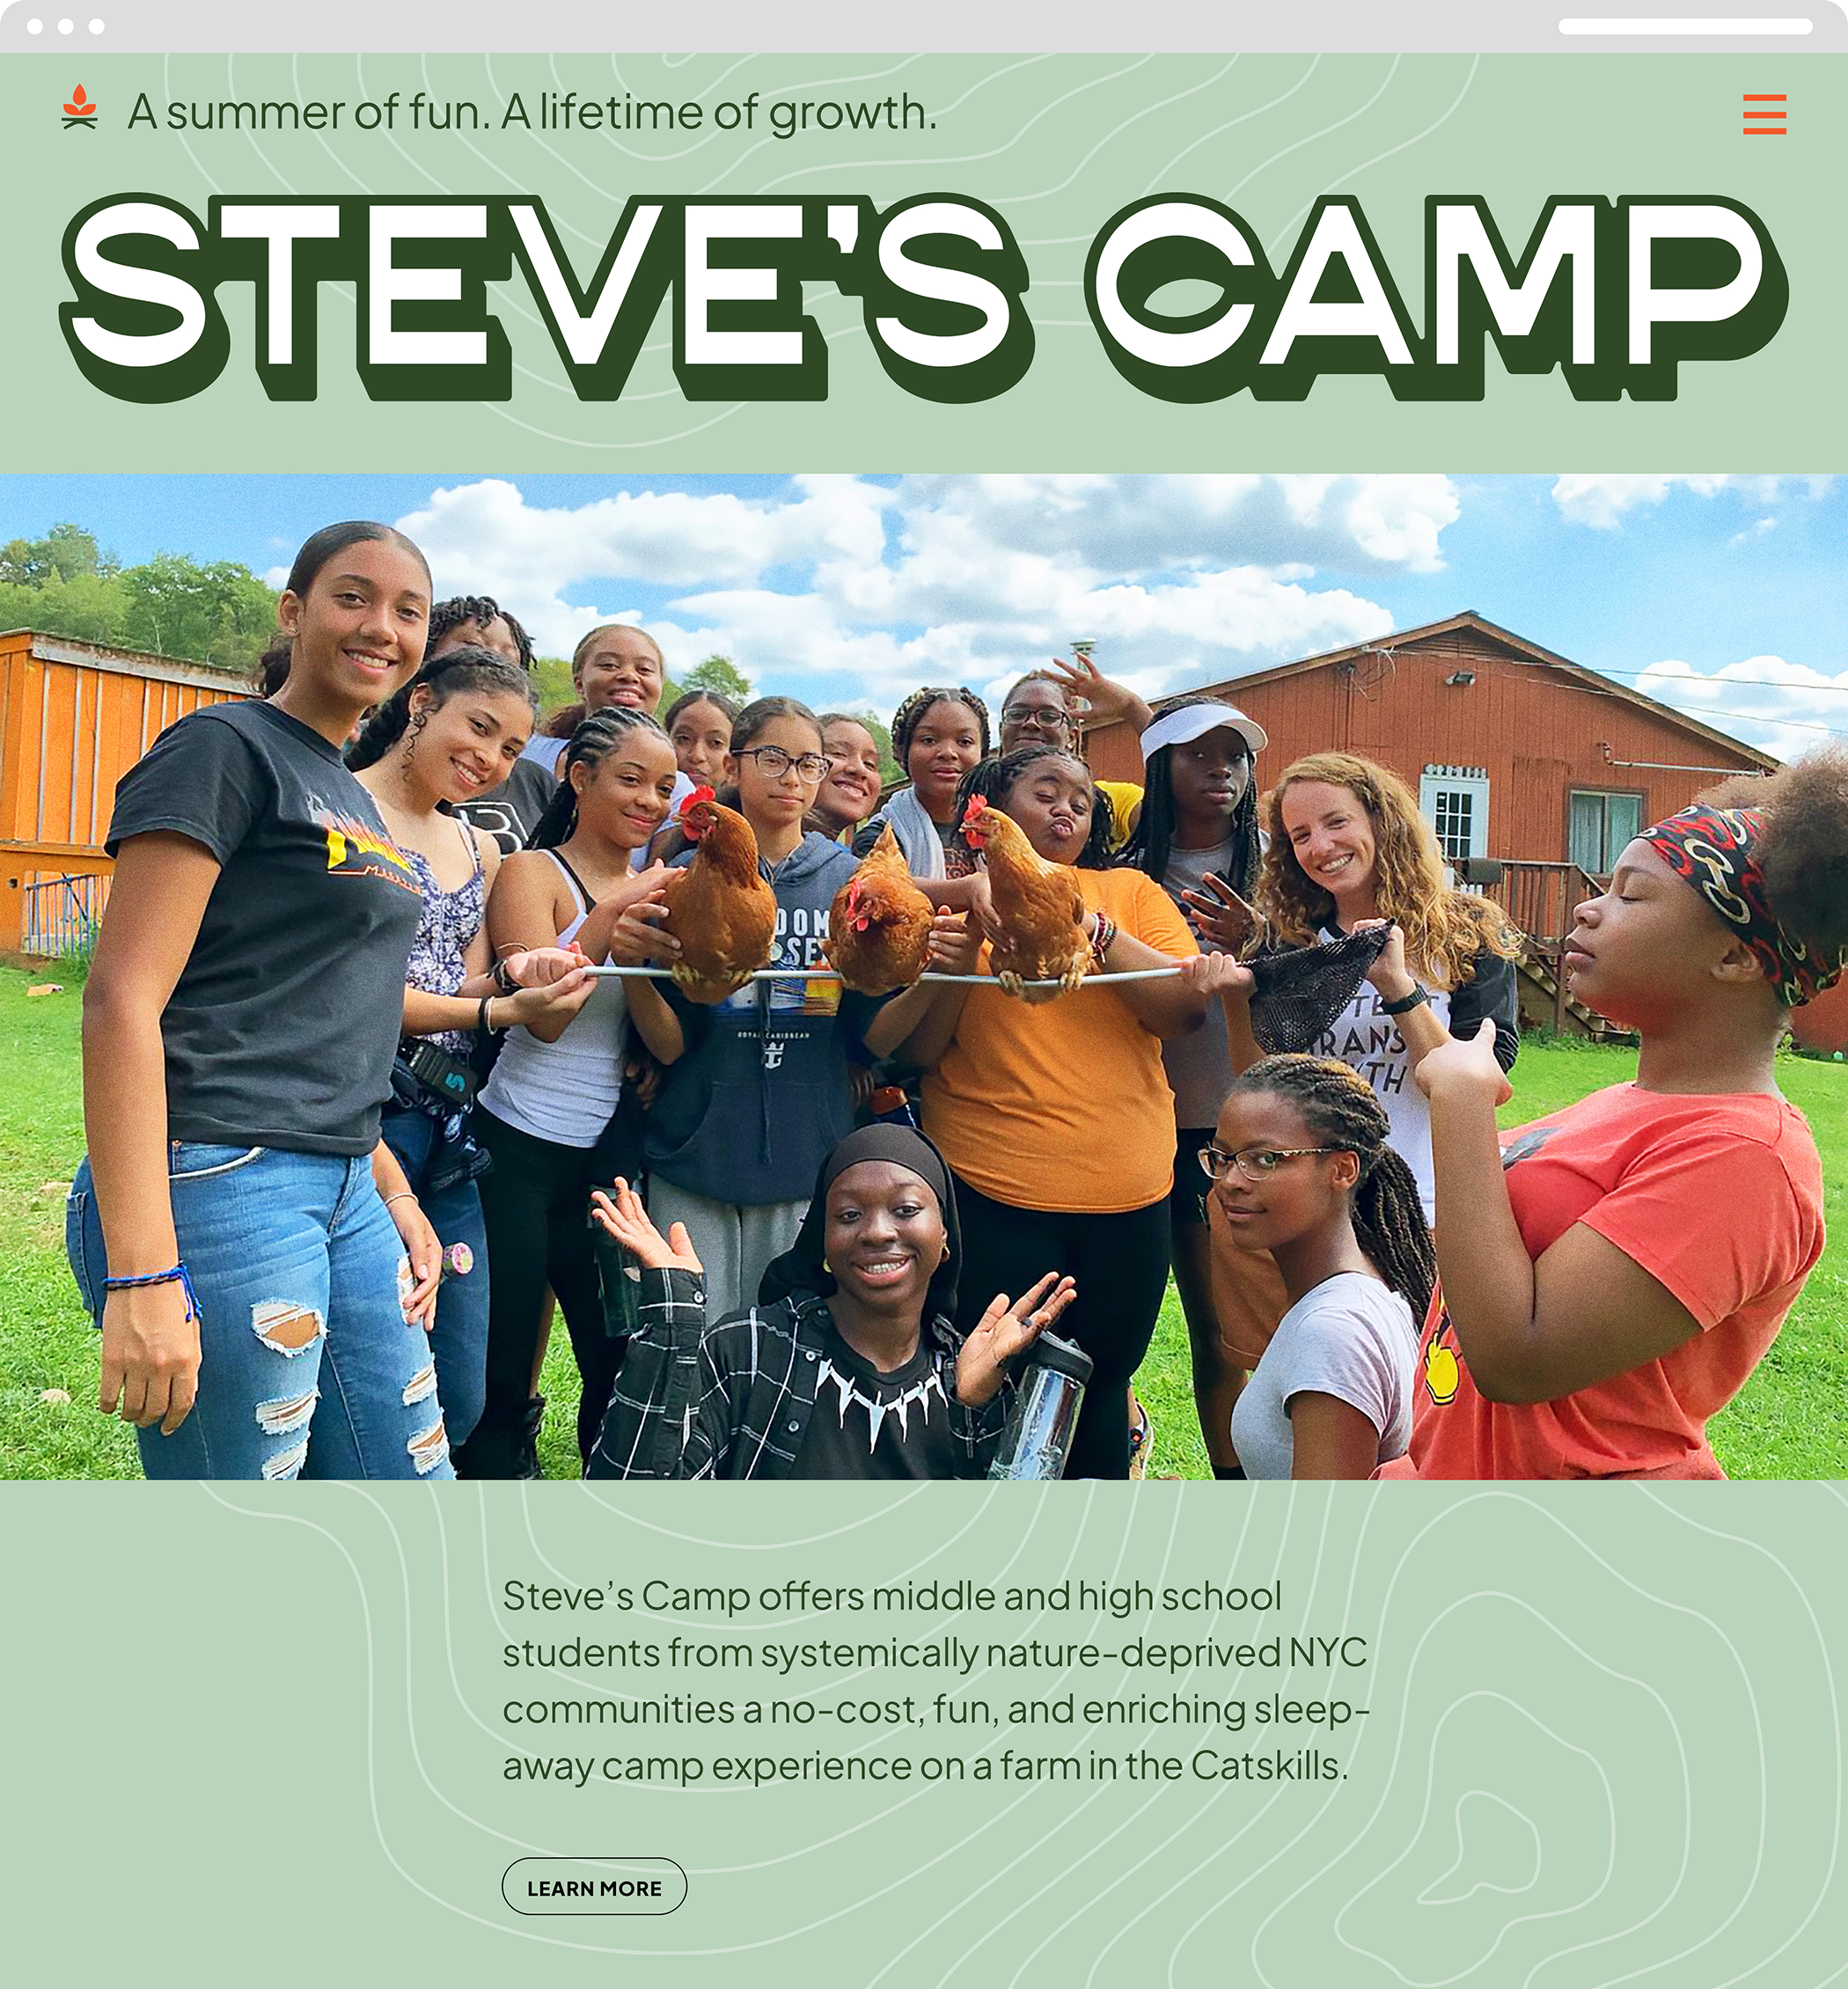 Image of the website homepage featuring a group of smiling female campers